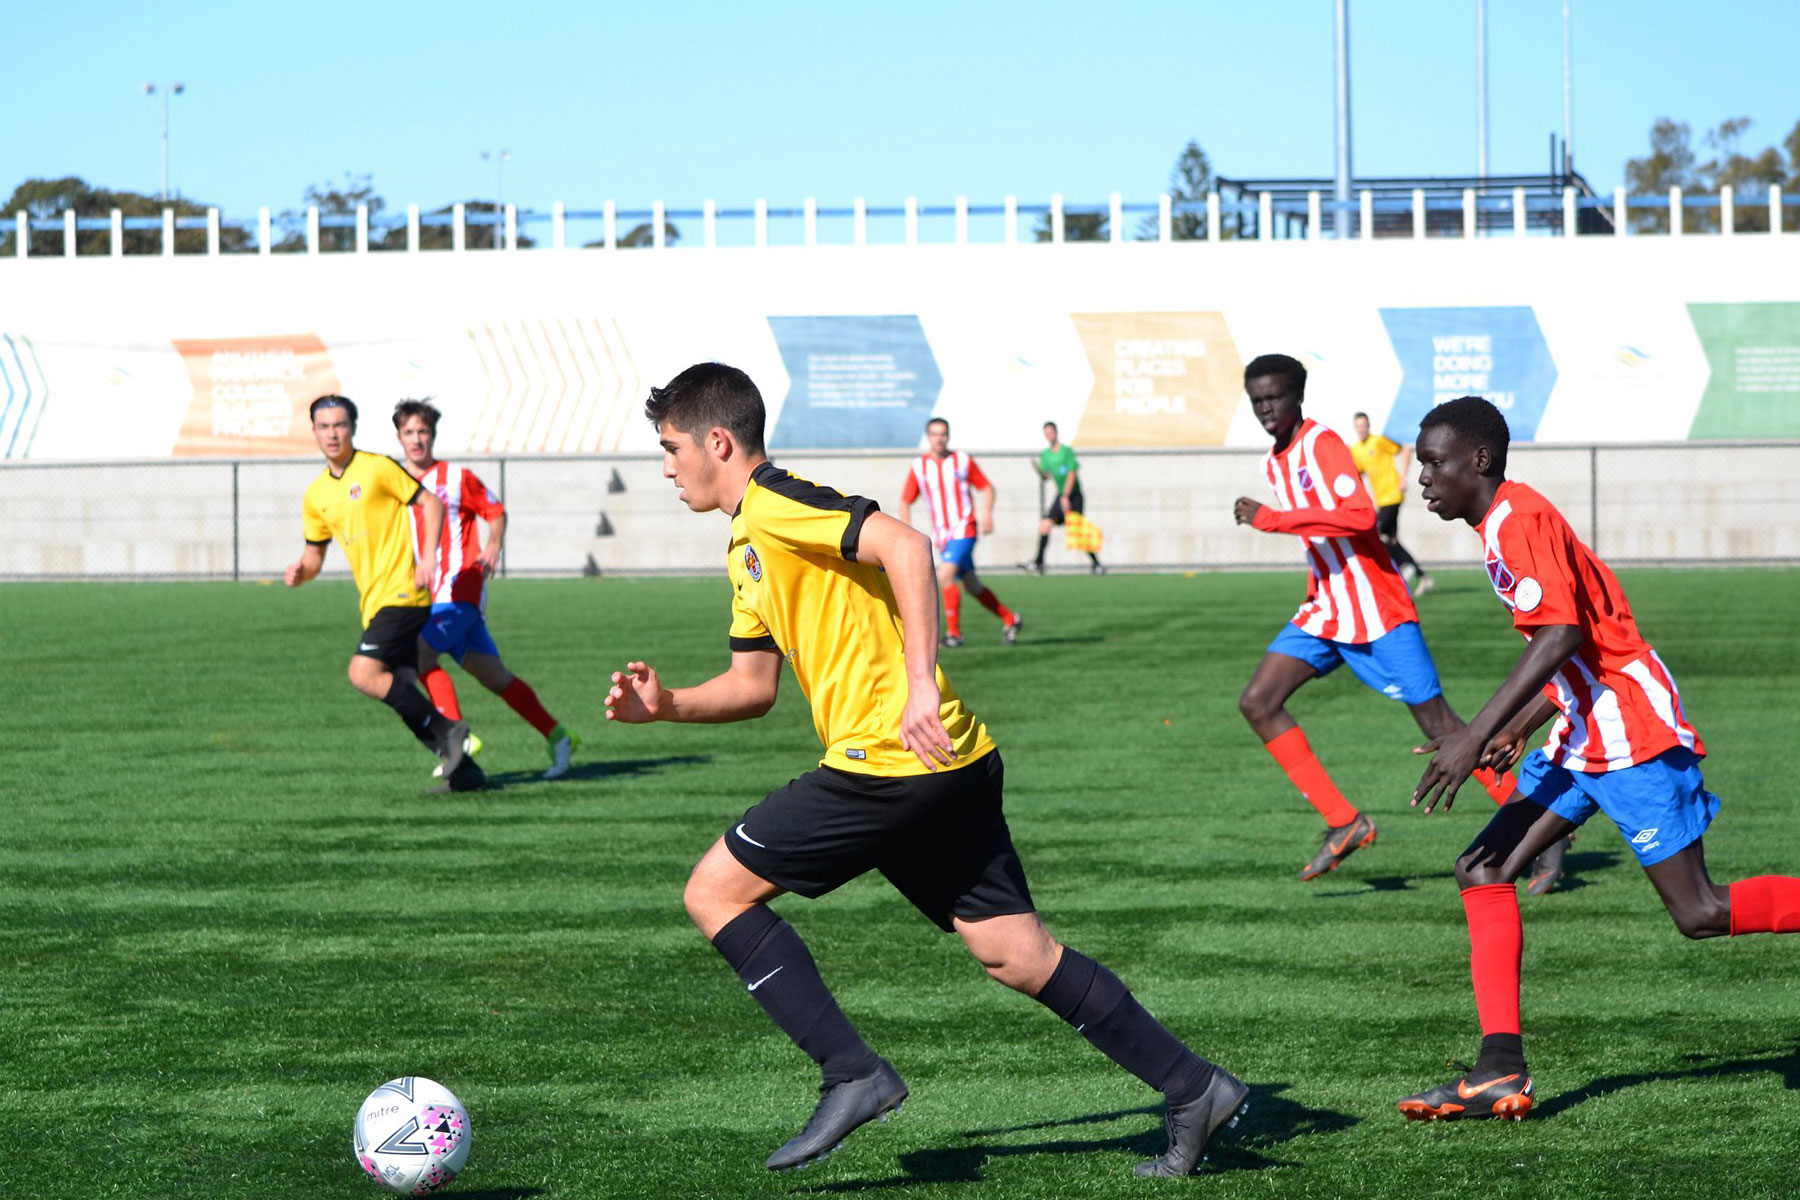 UNSW FC men's team playing a game